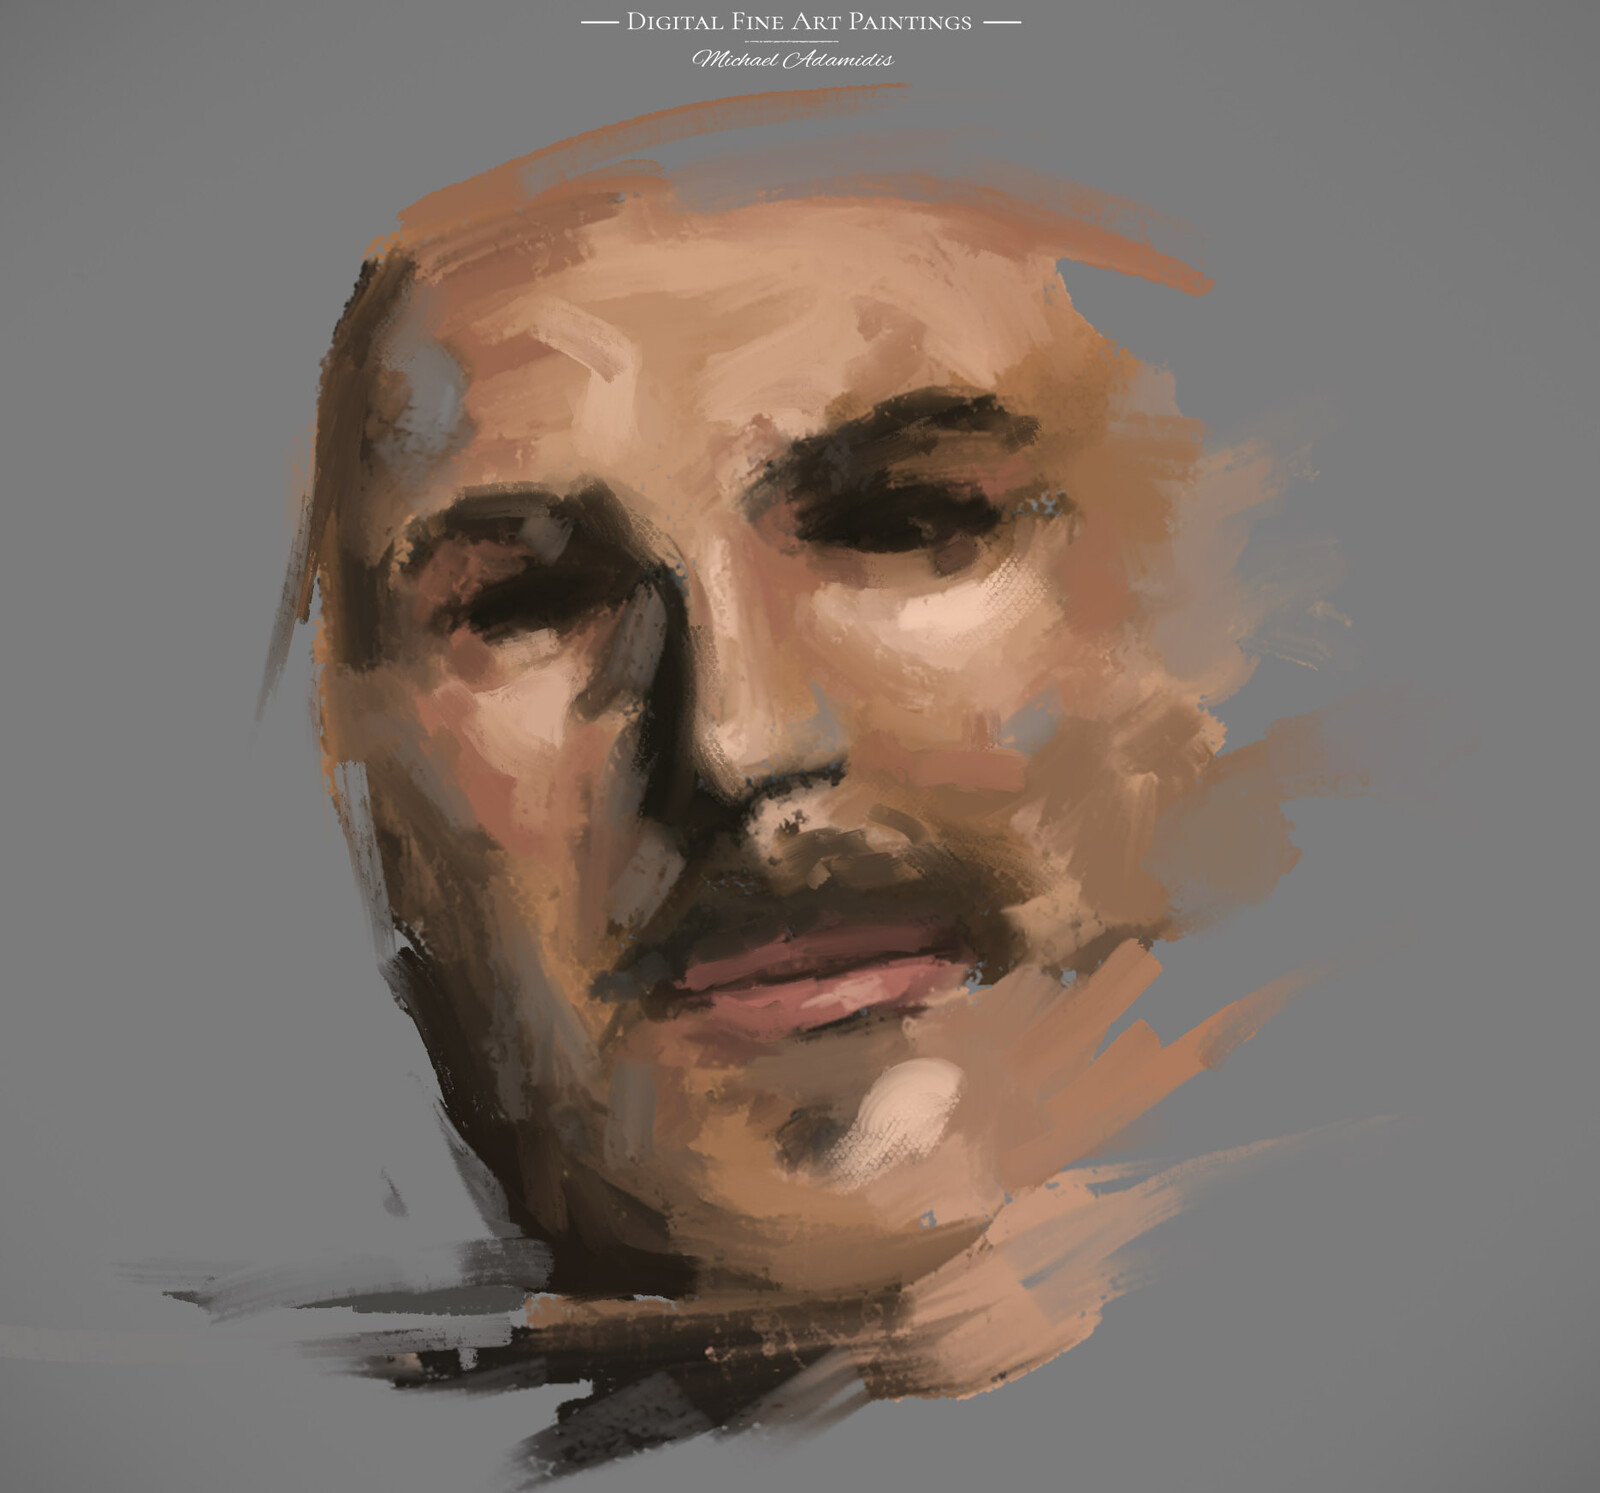 An unfinished but finished piece of work - Digital Portrait of a Man